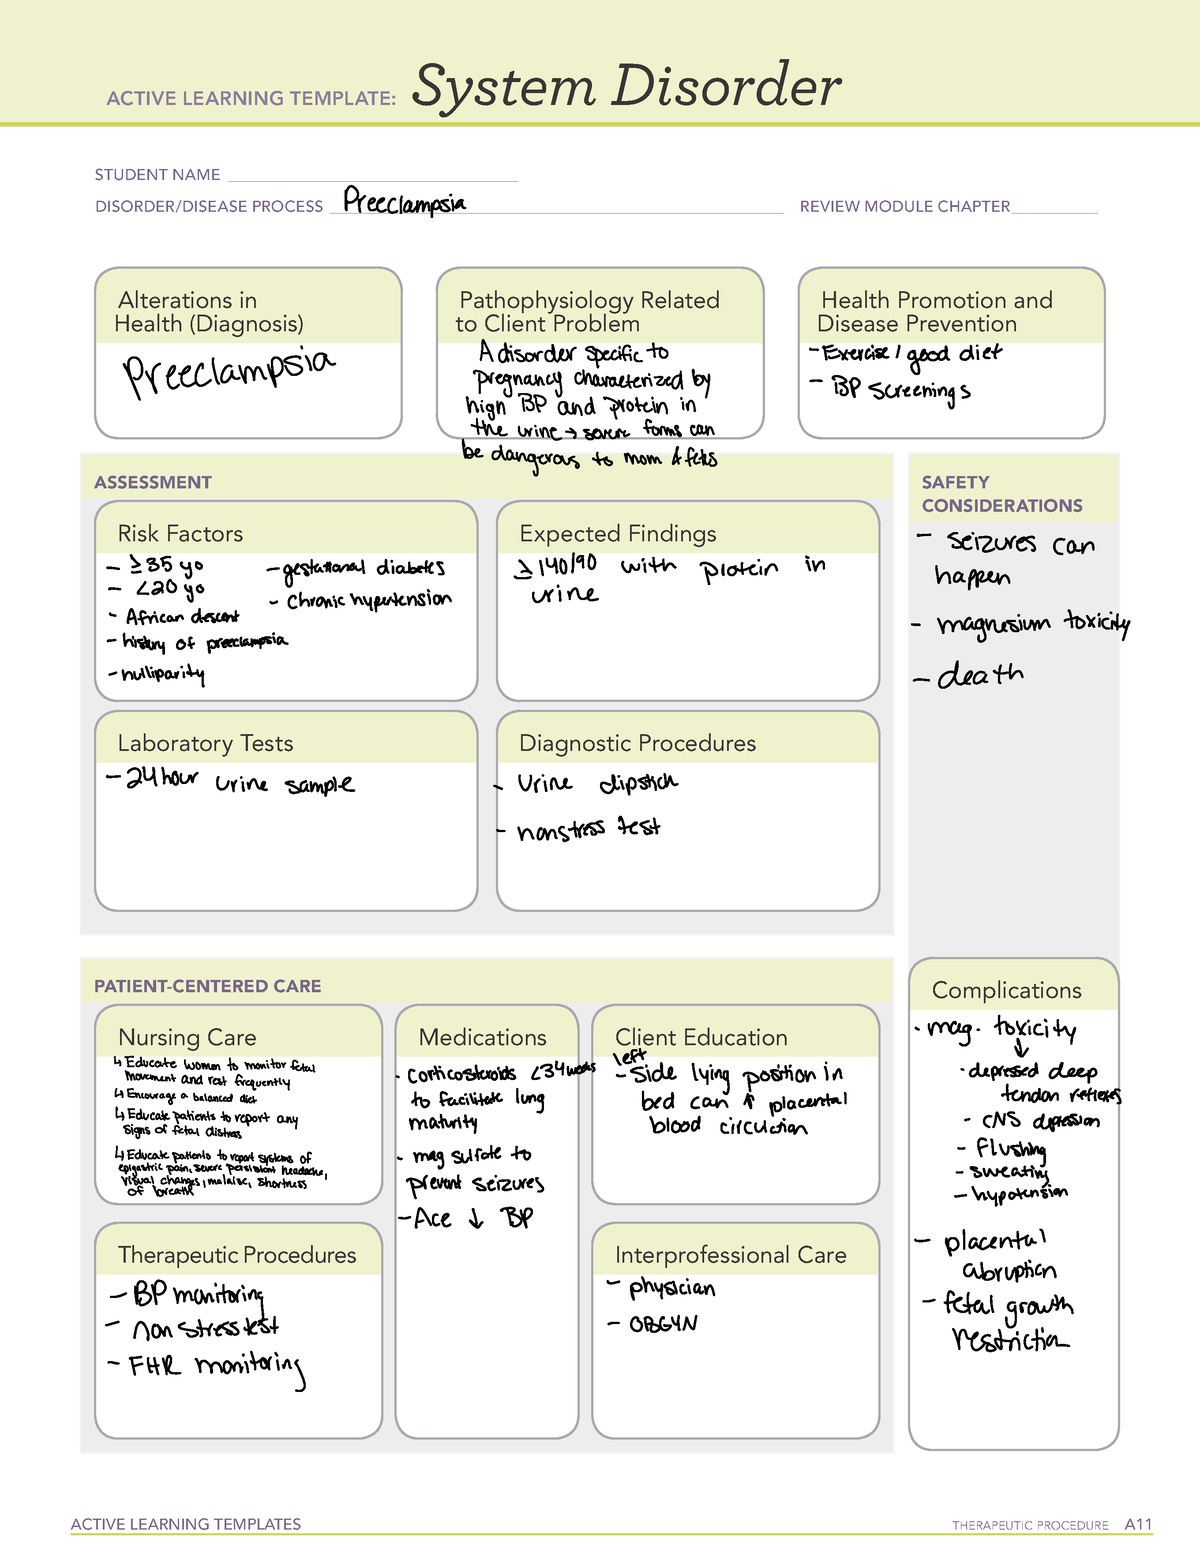 ATI Preeclampsia system disorder ACTIVE LEARNING TEMPLATES